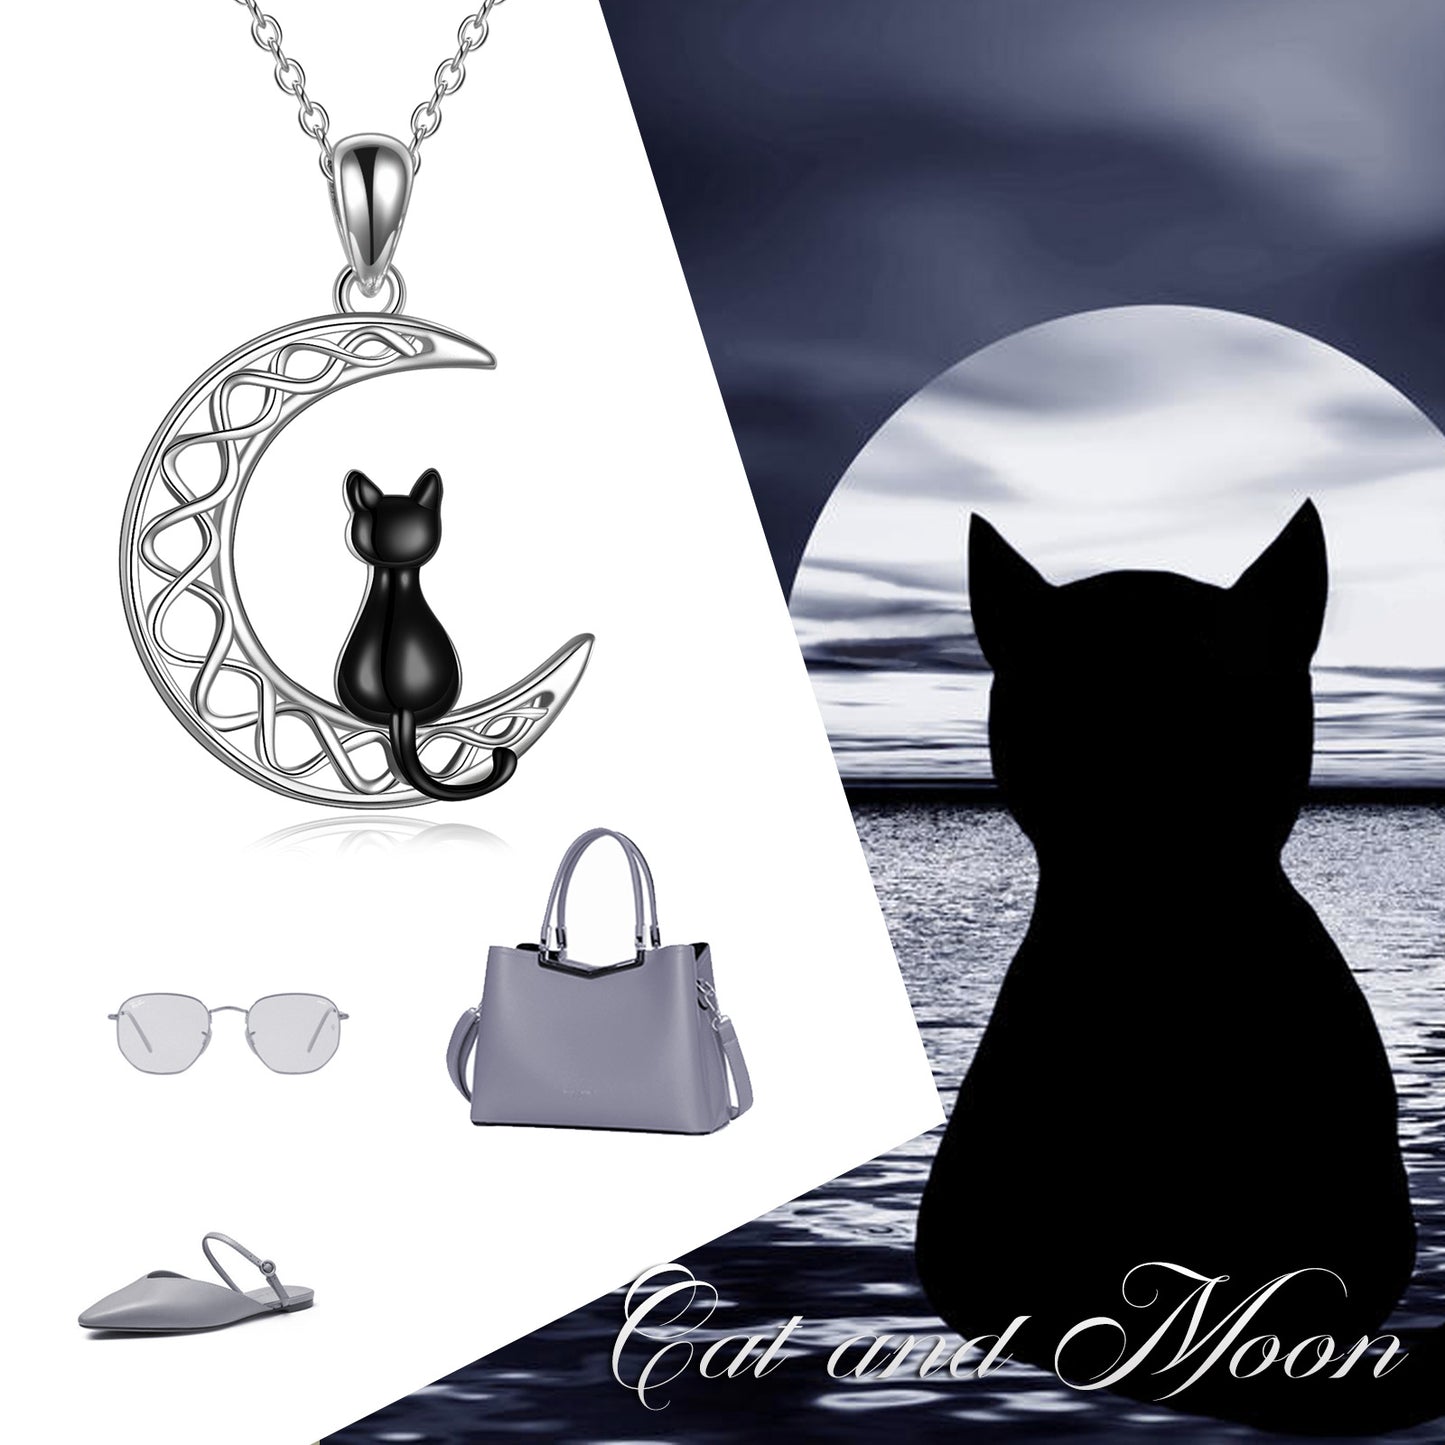 Celtic Moon Cat Necklace for Girls Sterling Silver Irish Jewelry - Niki Ice Jewelry 